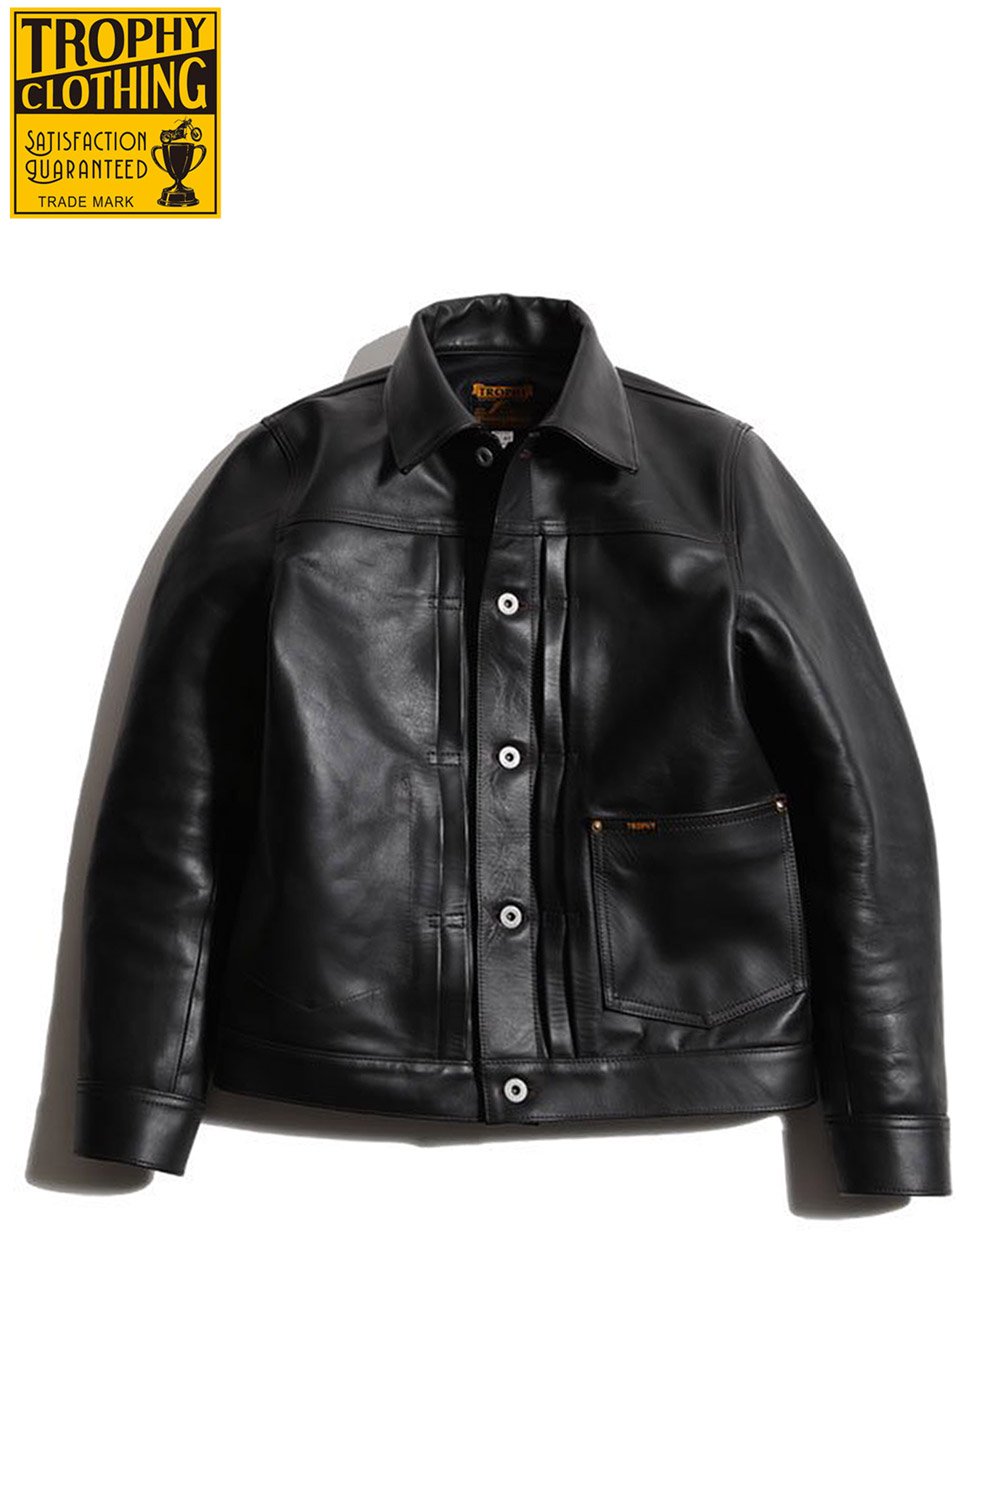 TROPHY CLOTHING(トロフィークロージング) レザージャケット HORSEHIDE 2605 JACKET TR-YL23 通販正規取扱  | ハーレムストア公式通販サイト